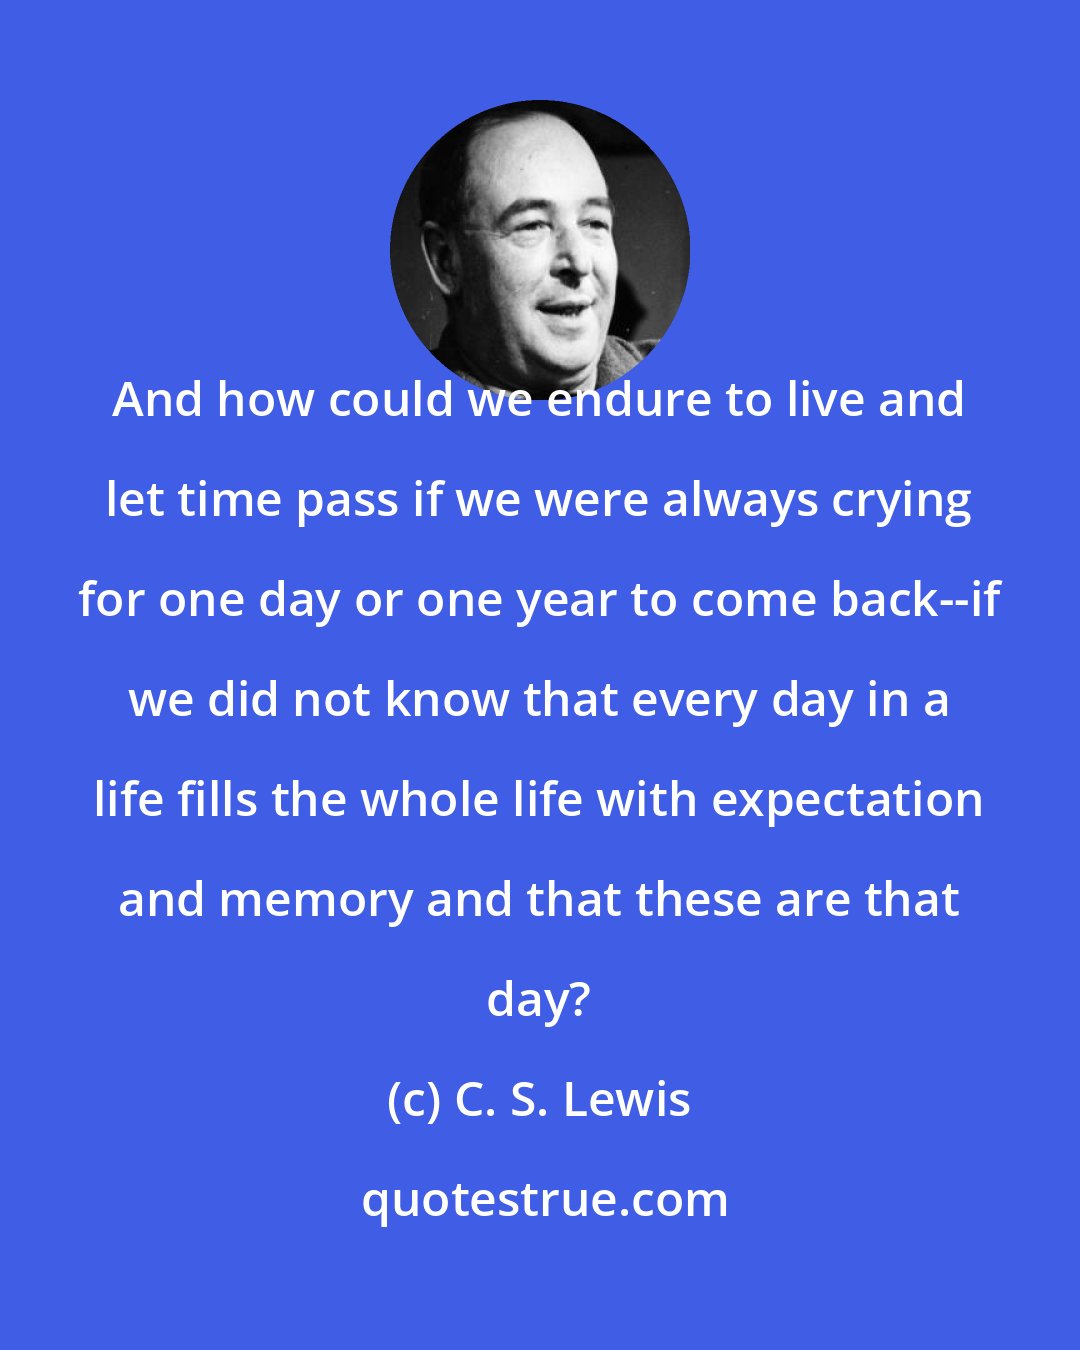 C. S. Lewis: And how could we endure to live and let time pass if we were always crying for one day or one year to come back--if we did not know that every day in a life fills the whole life with expectation and memory and that these are that day?